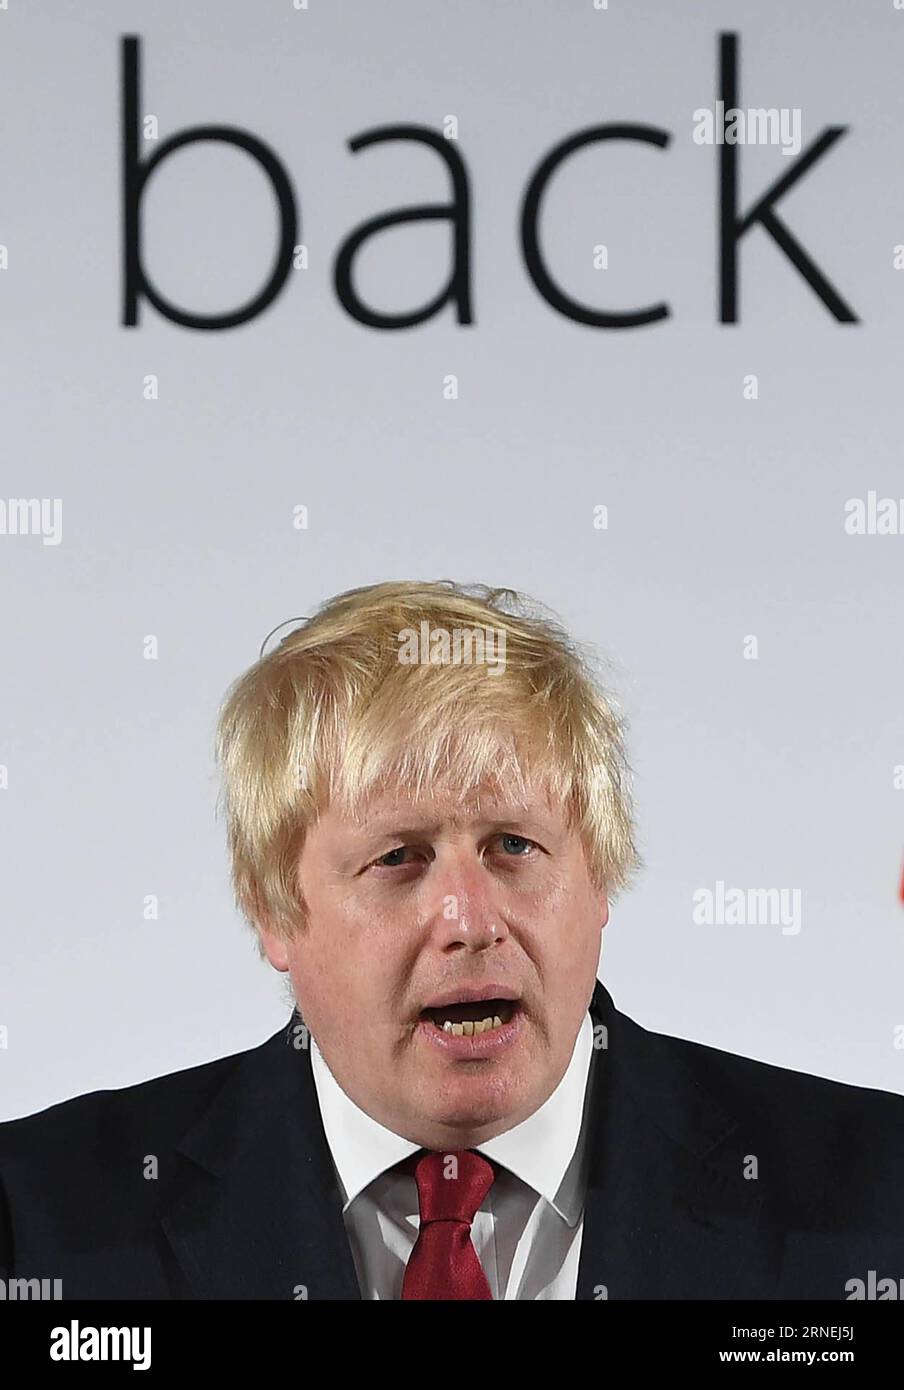 (160624) -- LONDON, June 24, 2016 () -- Former London Mayor and Vote Leave campaigner Boris Johnson speaks during a press conference in London, Britain, June 24, 2016. The Leave camp has won Britain s Brexit referendum on Friday morning by obtaining nearly 52 percent of ballots, pulling the country out of the 28-nation European Union (EU) after its 43-year membership. () BRITAIN-LONDON-BREXIT-BORIS JOHNSON Xinhua PUBLICATIONxNOTxINxCHN   160624 London June 24 2016 Former London Mayor and VOTE Leave Campaigner Boris Johnson Speaks during a Press Conference in London Britain June 24 2016 The Lea Stock Photo